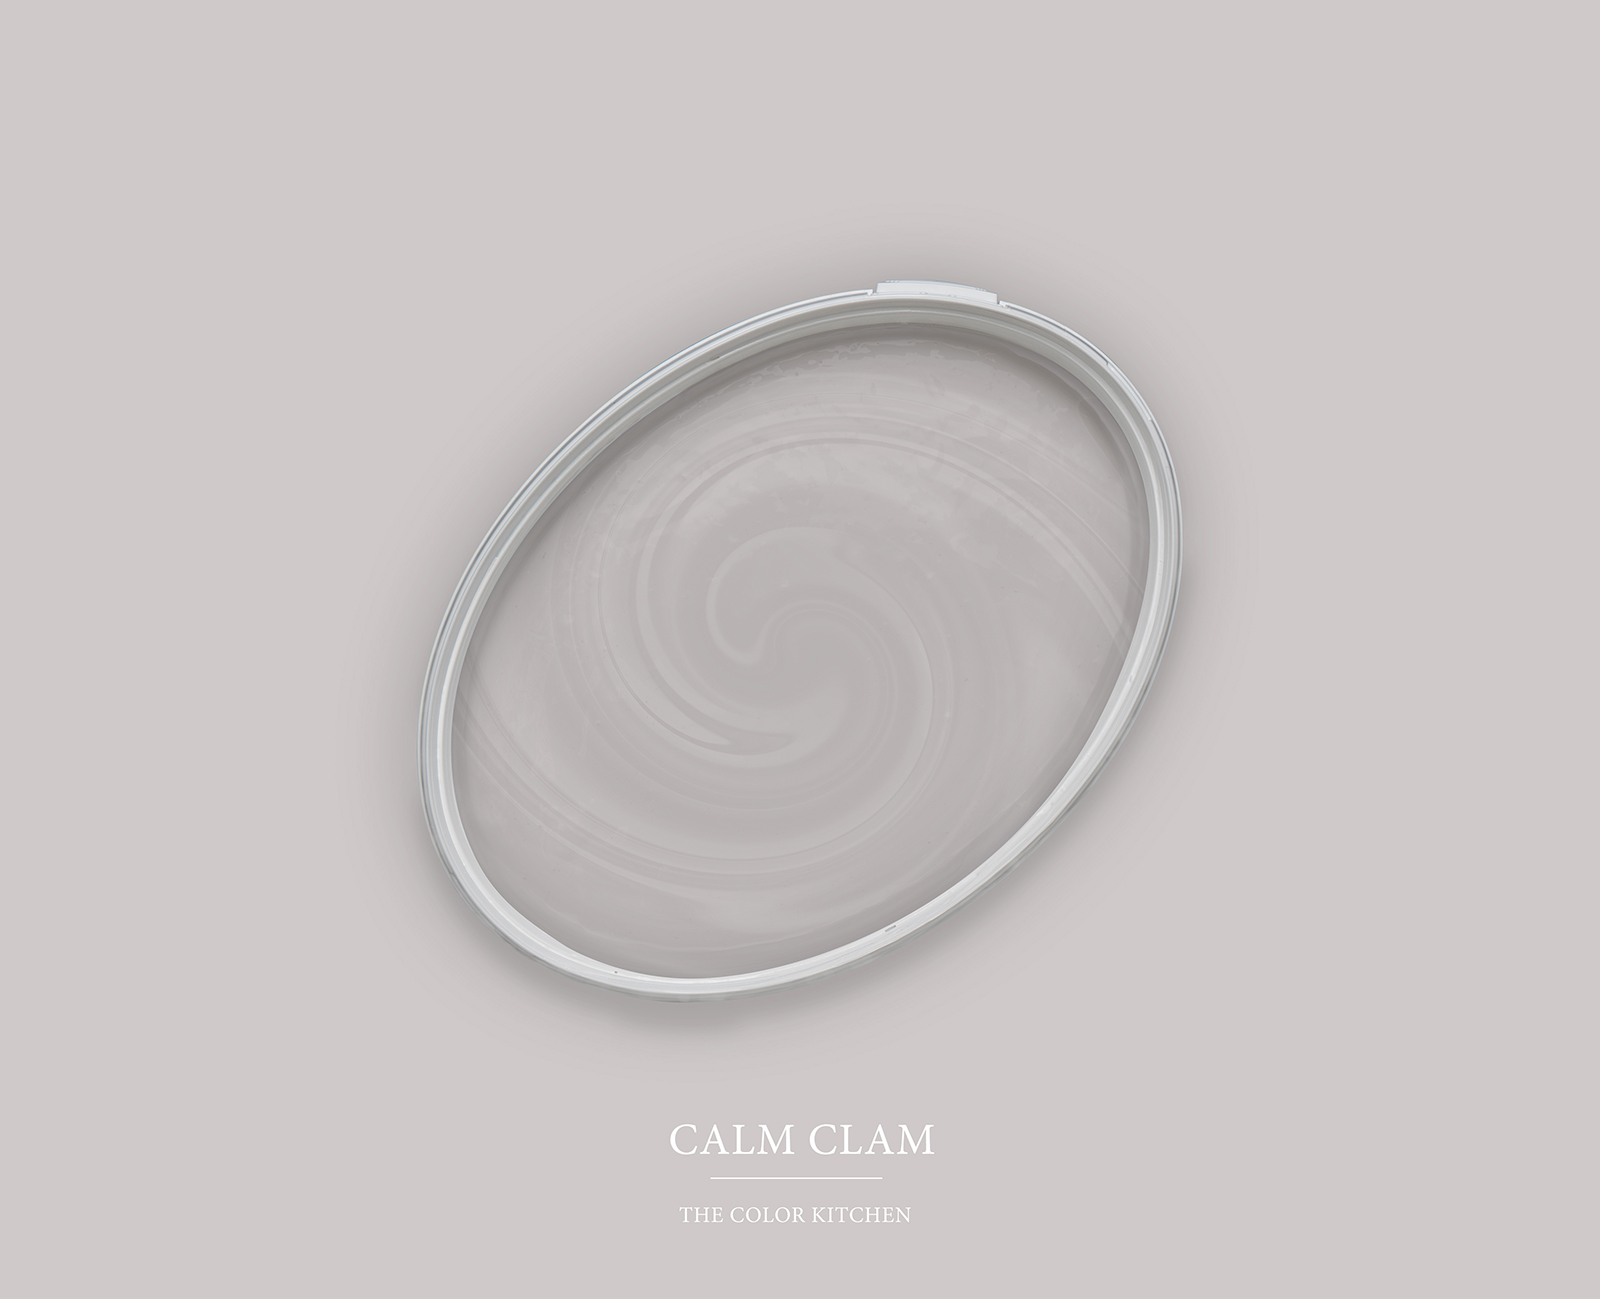         Wall Paint TCK2000 »Calm Clam« in homely greige – 2.5 litre
    